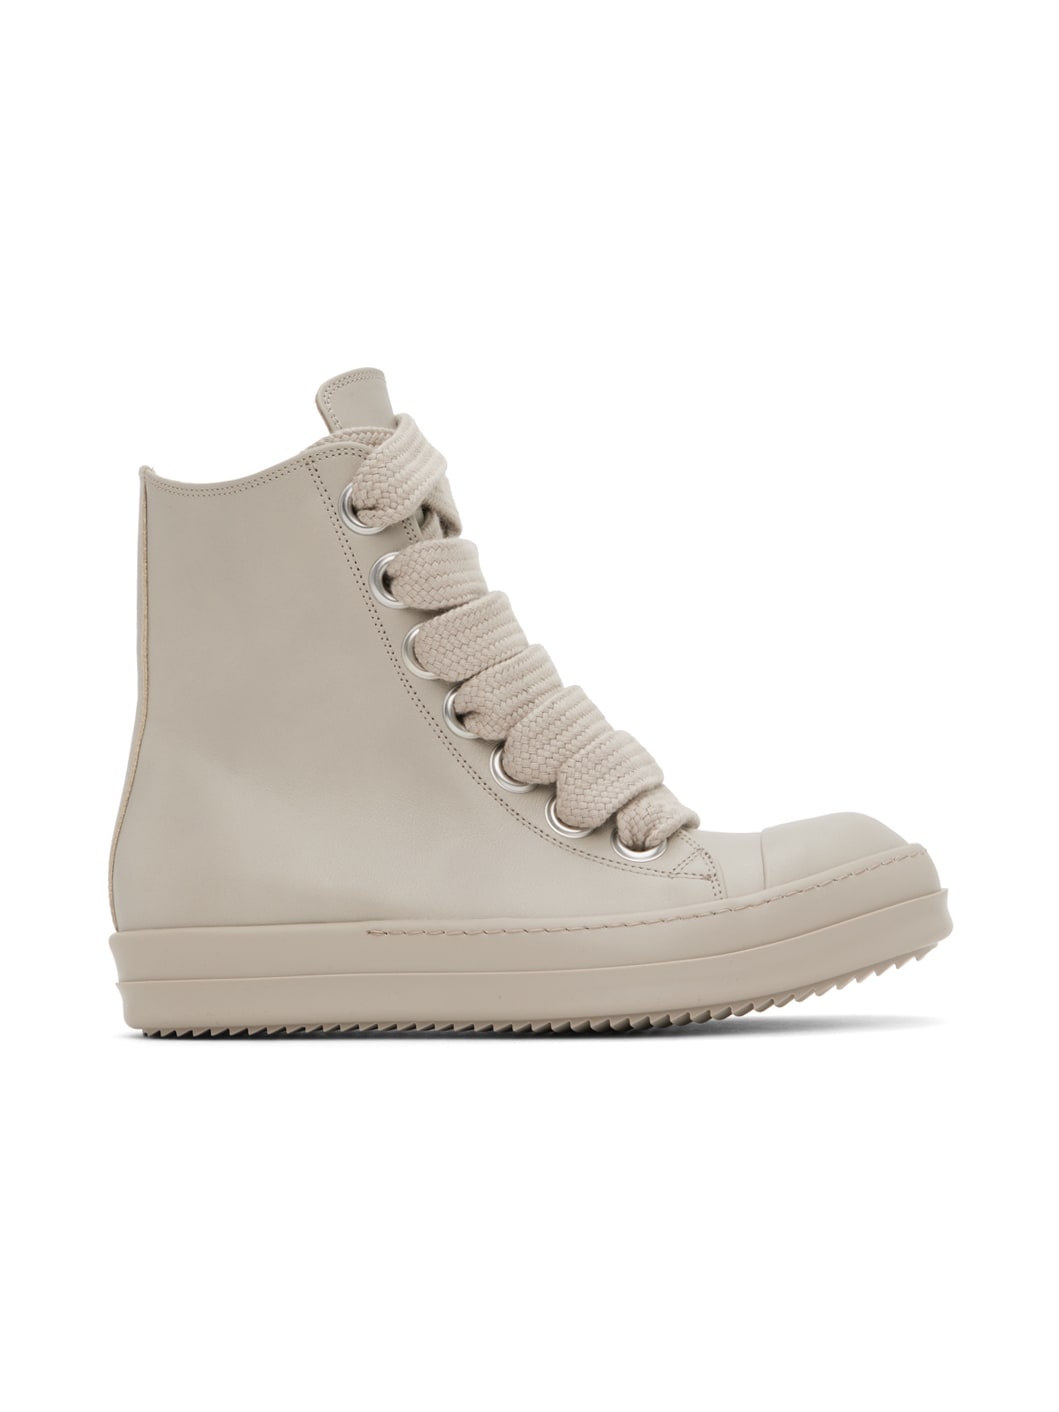 Off-White Washed Calf Sneakers - 1